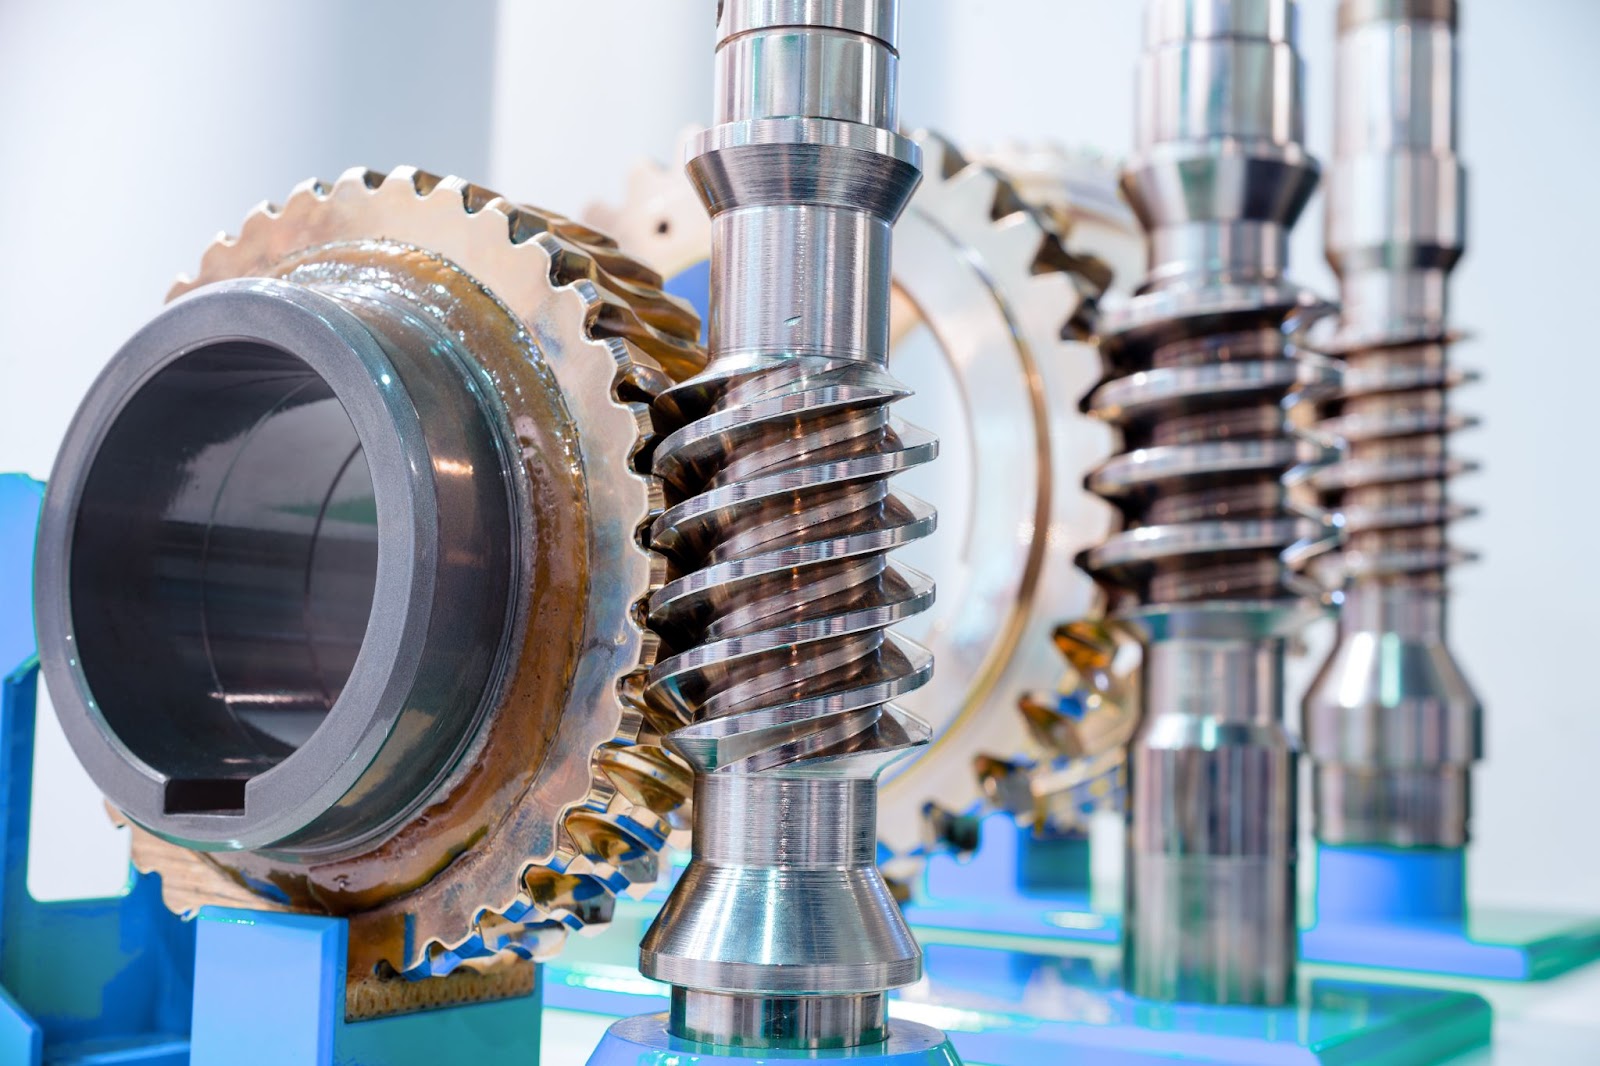 As the Worm Turns: How Worm Gears Control Speed in Industrial